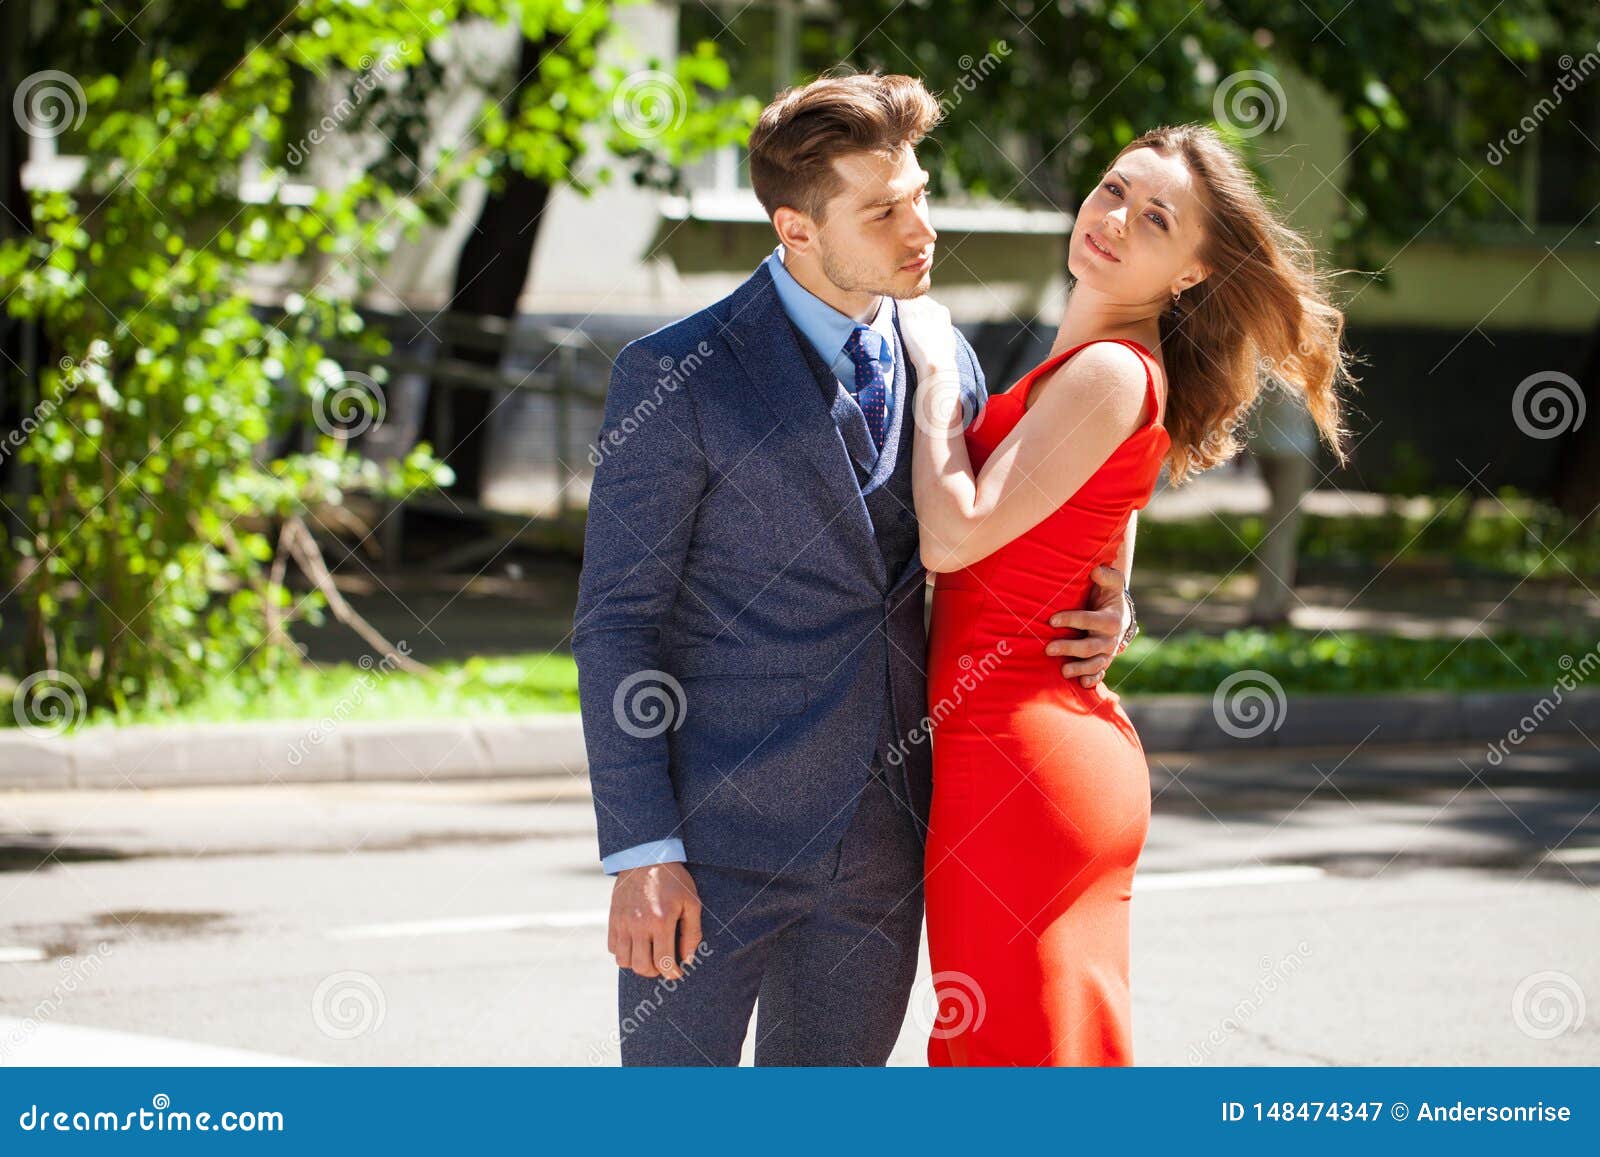 https://thumbs.dreamstime.com/z/young-couple-european-women-men-city-street-lifestyle-togetherness-concept-romance-love-young-couple-european-148474347.jpg